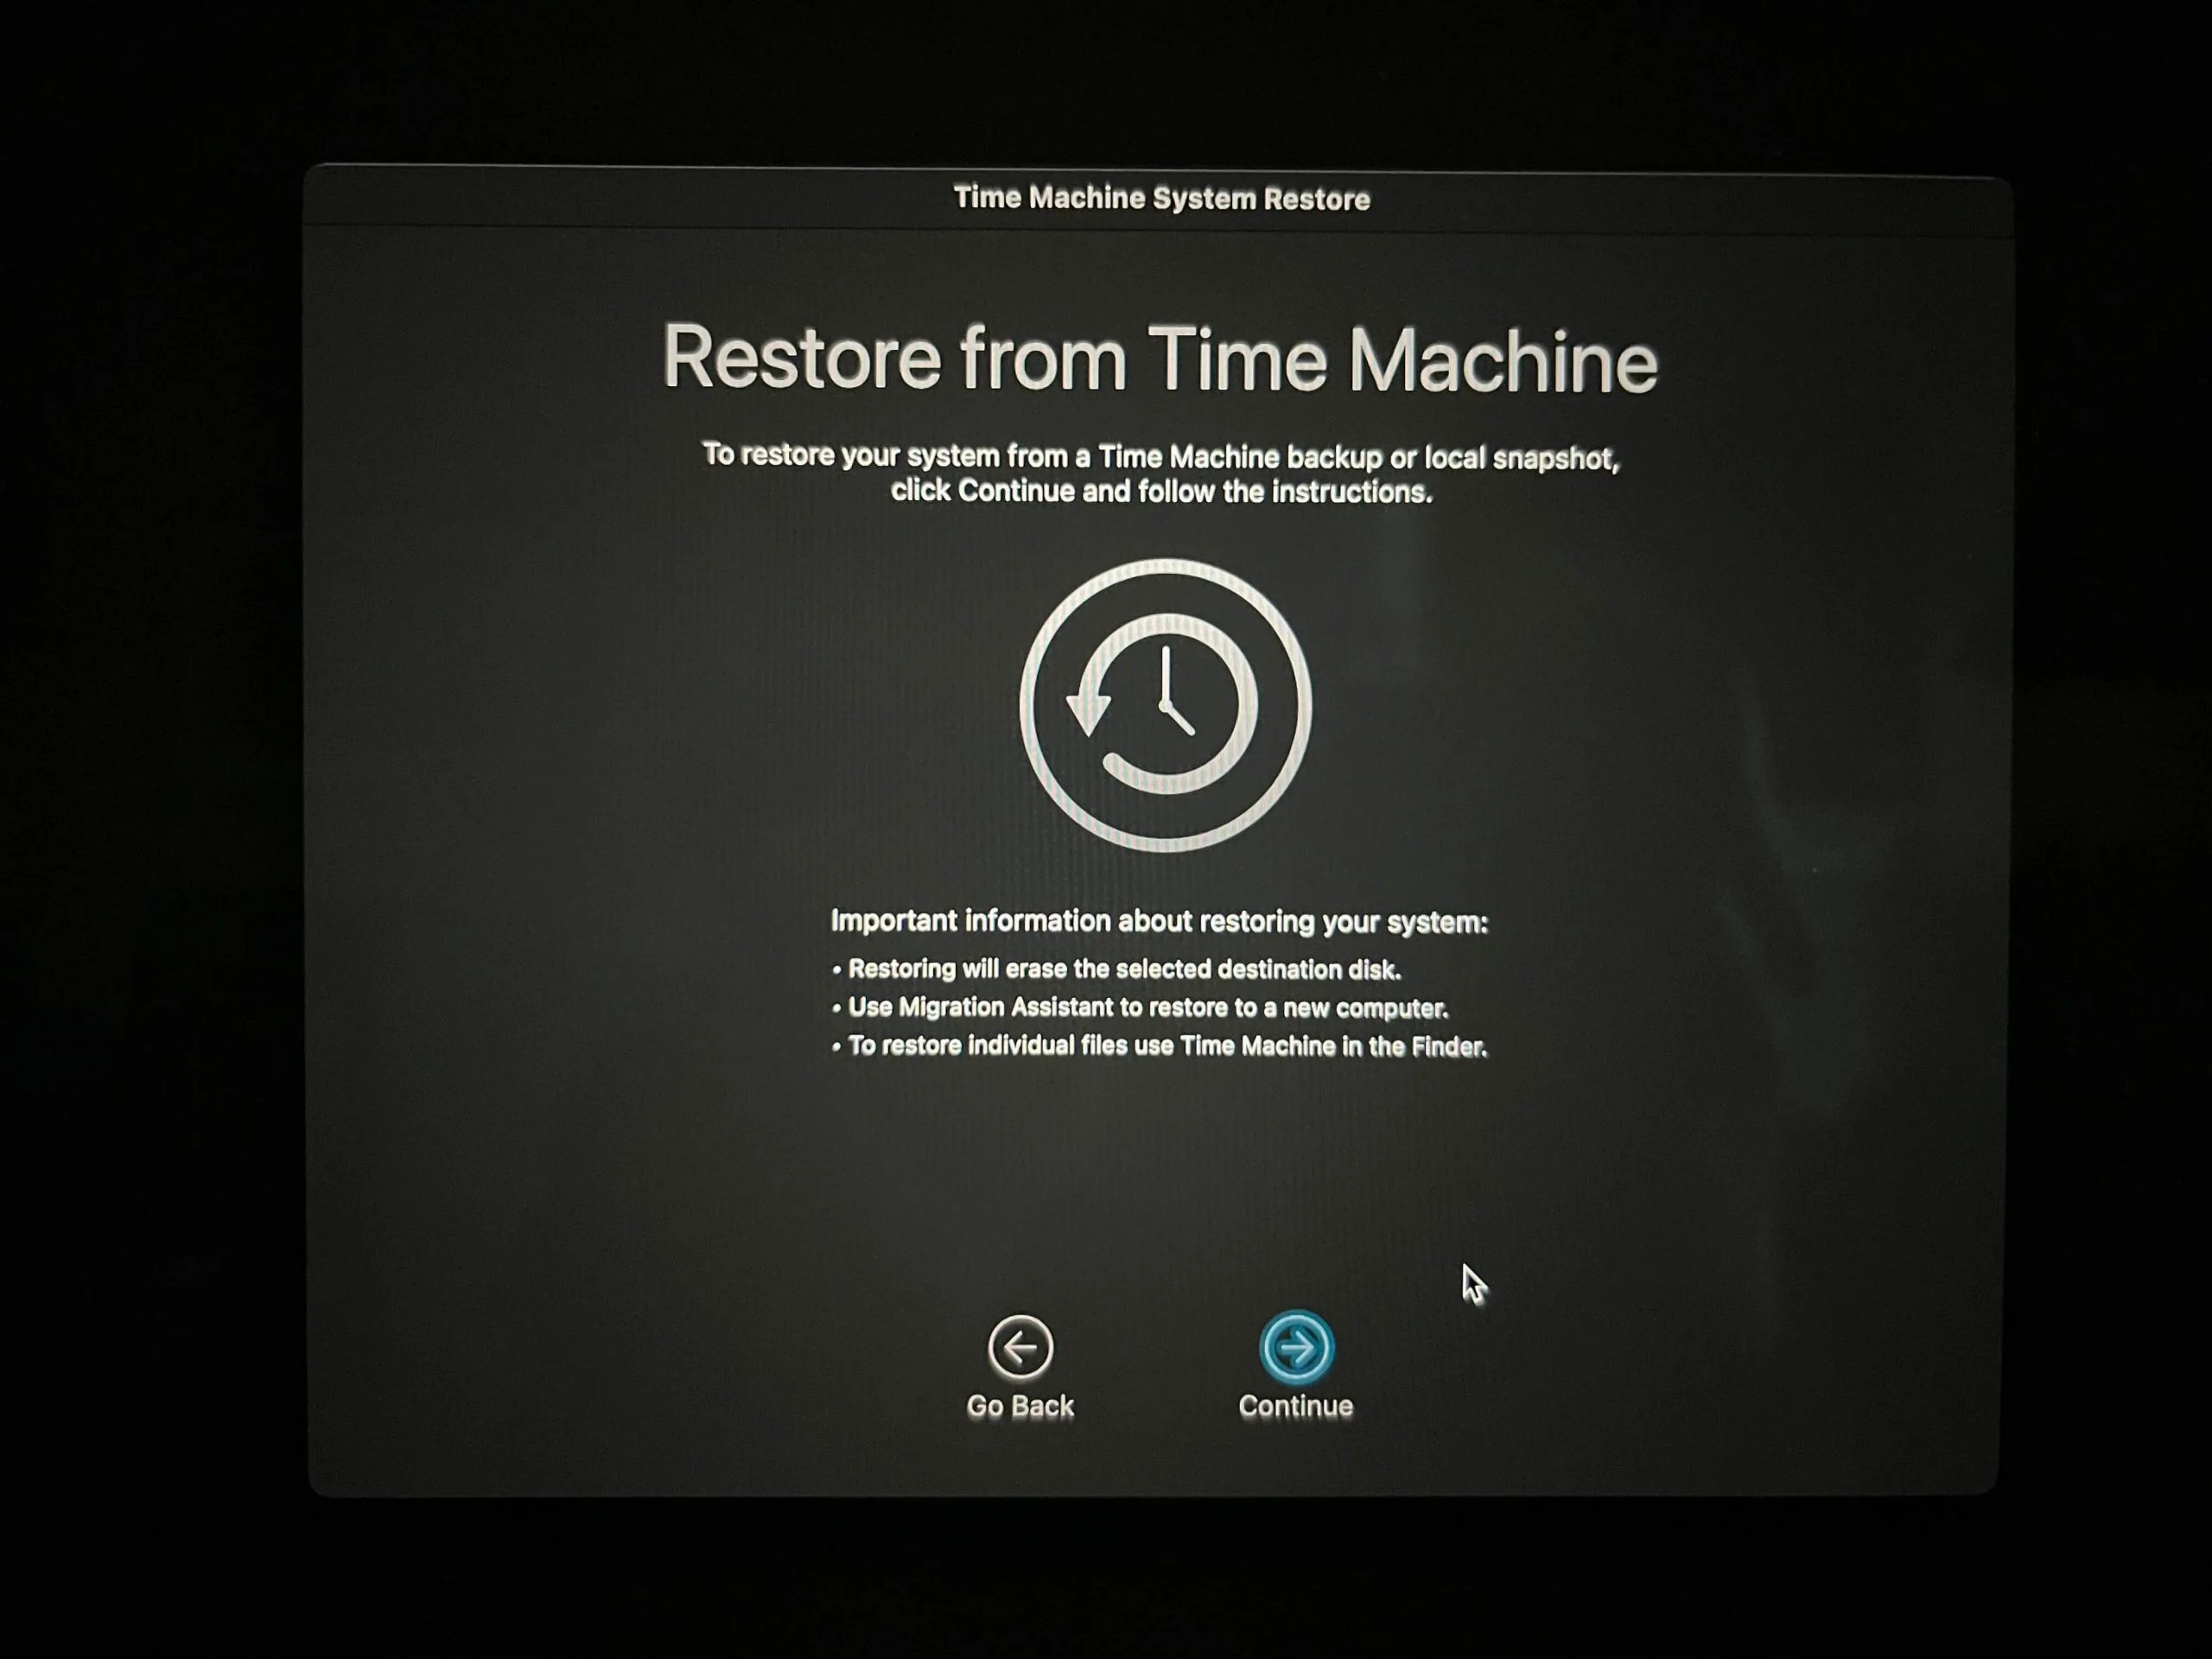 Step 3 to restore from Time Machine on Mac: Read the information